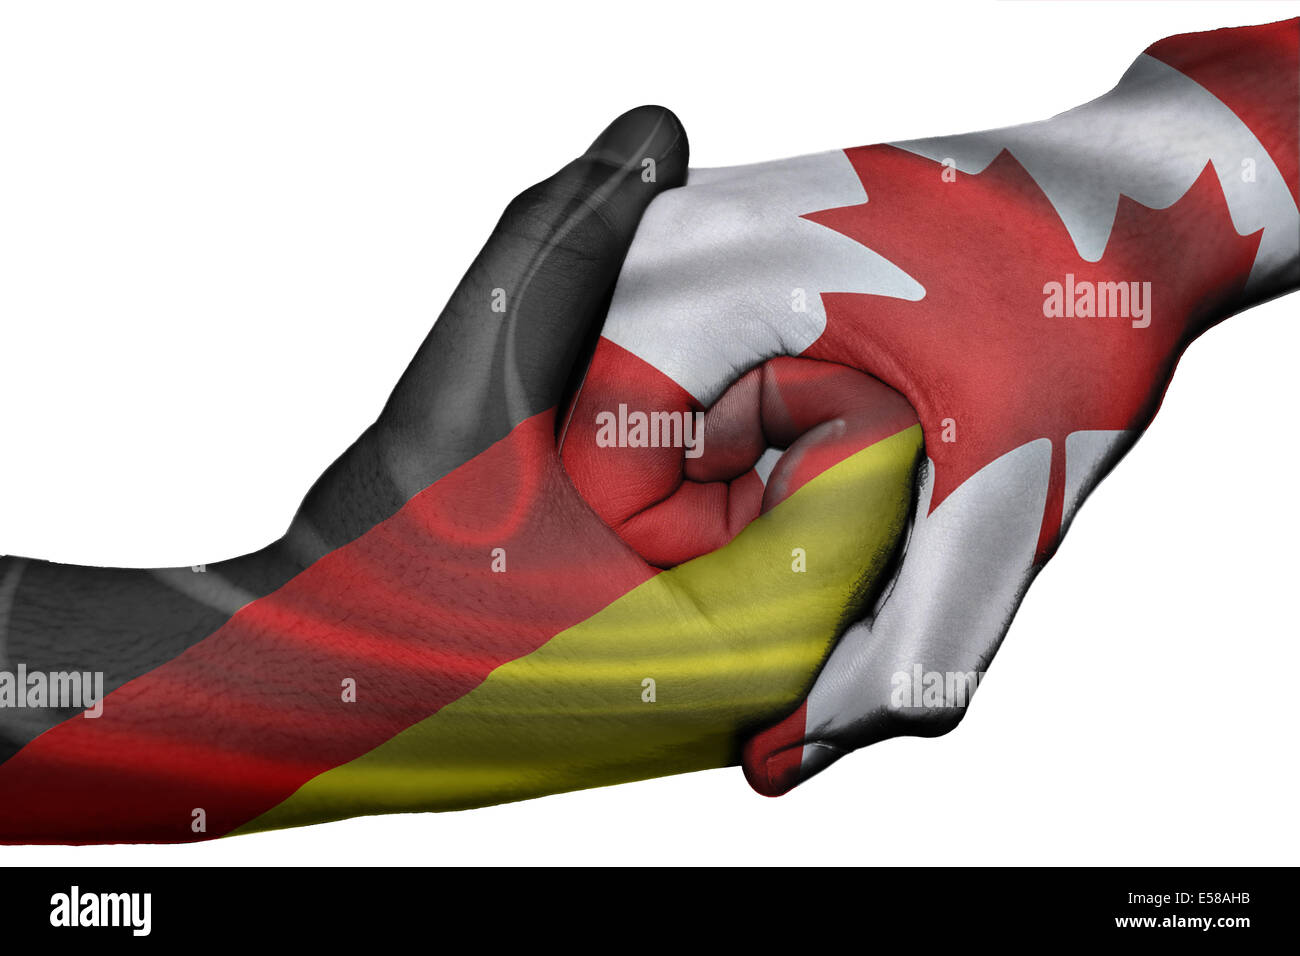 Diplomatic handshake between countries: flags of Germany and Canada overprinted the two hands Stock Photo